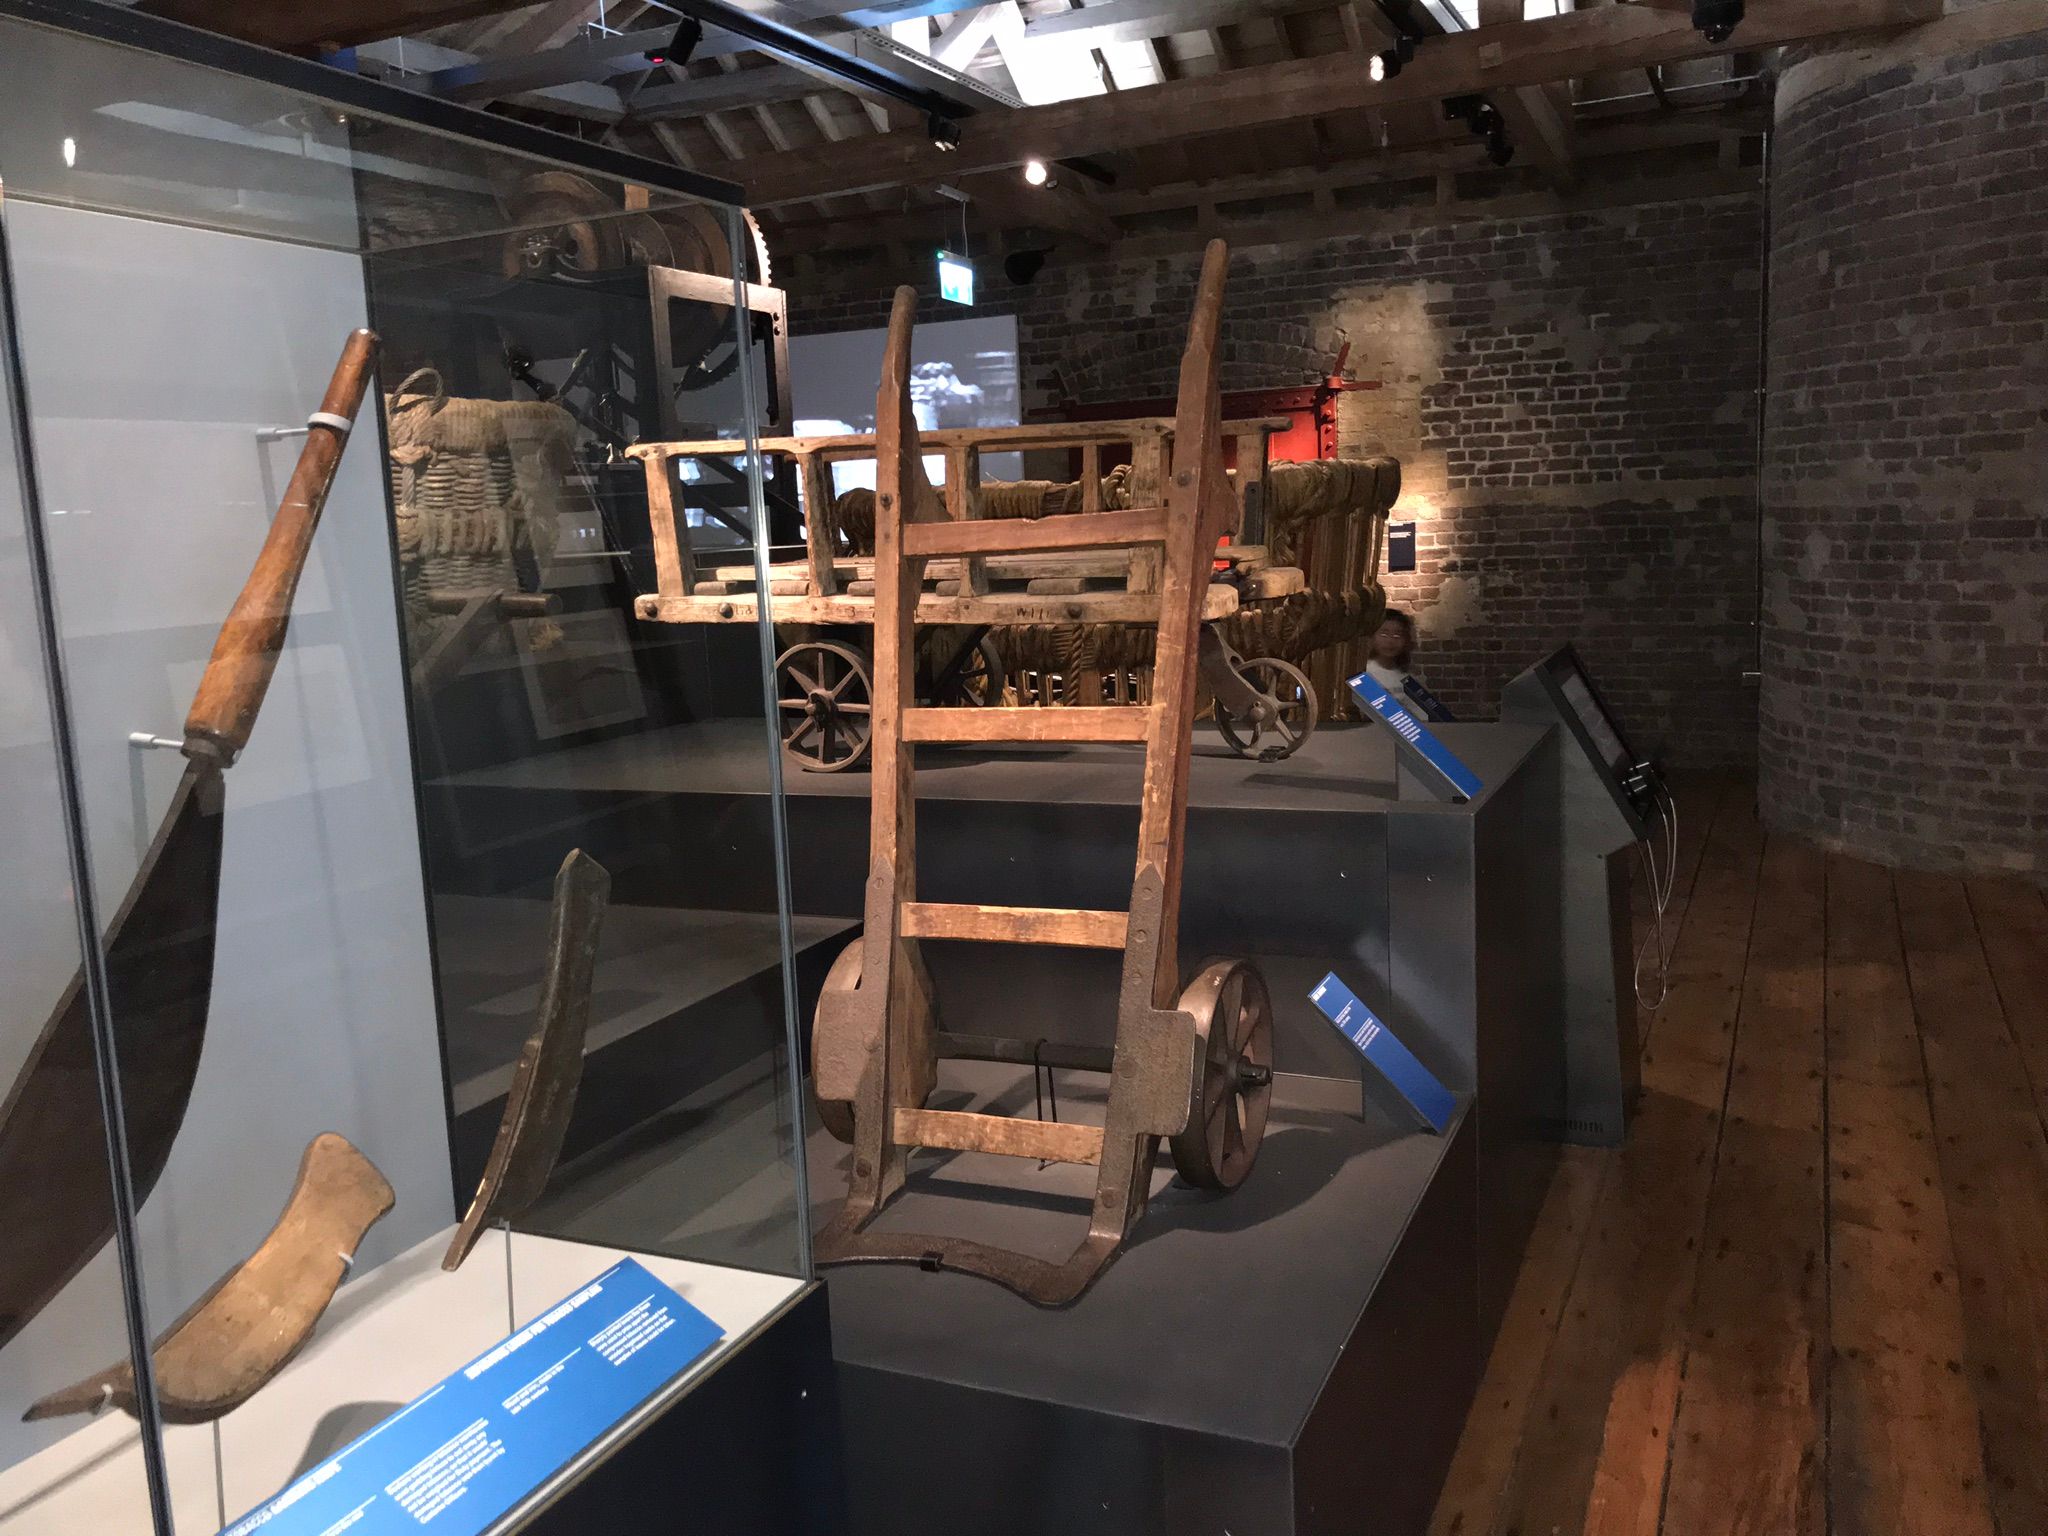 Gallery containing dock worker equipment from 1800s